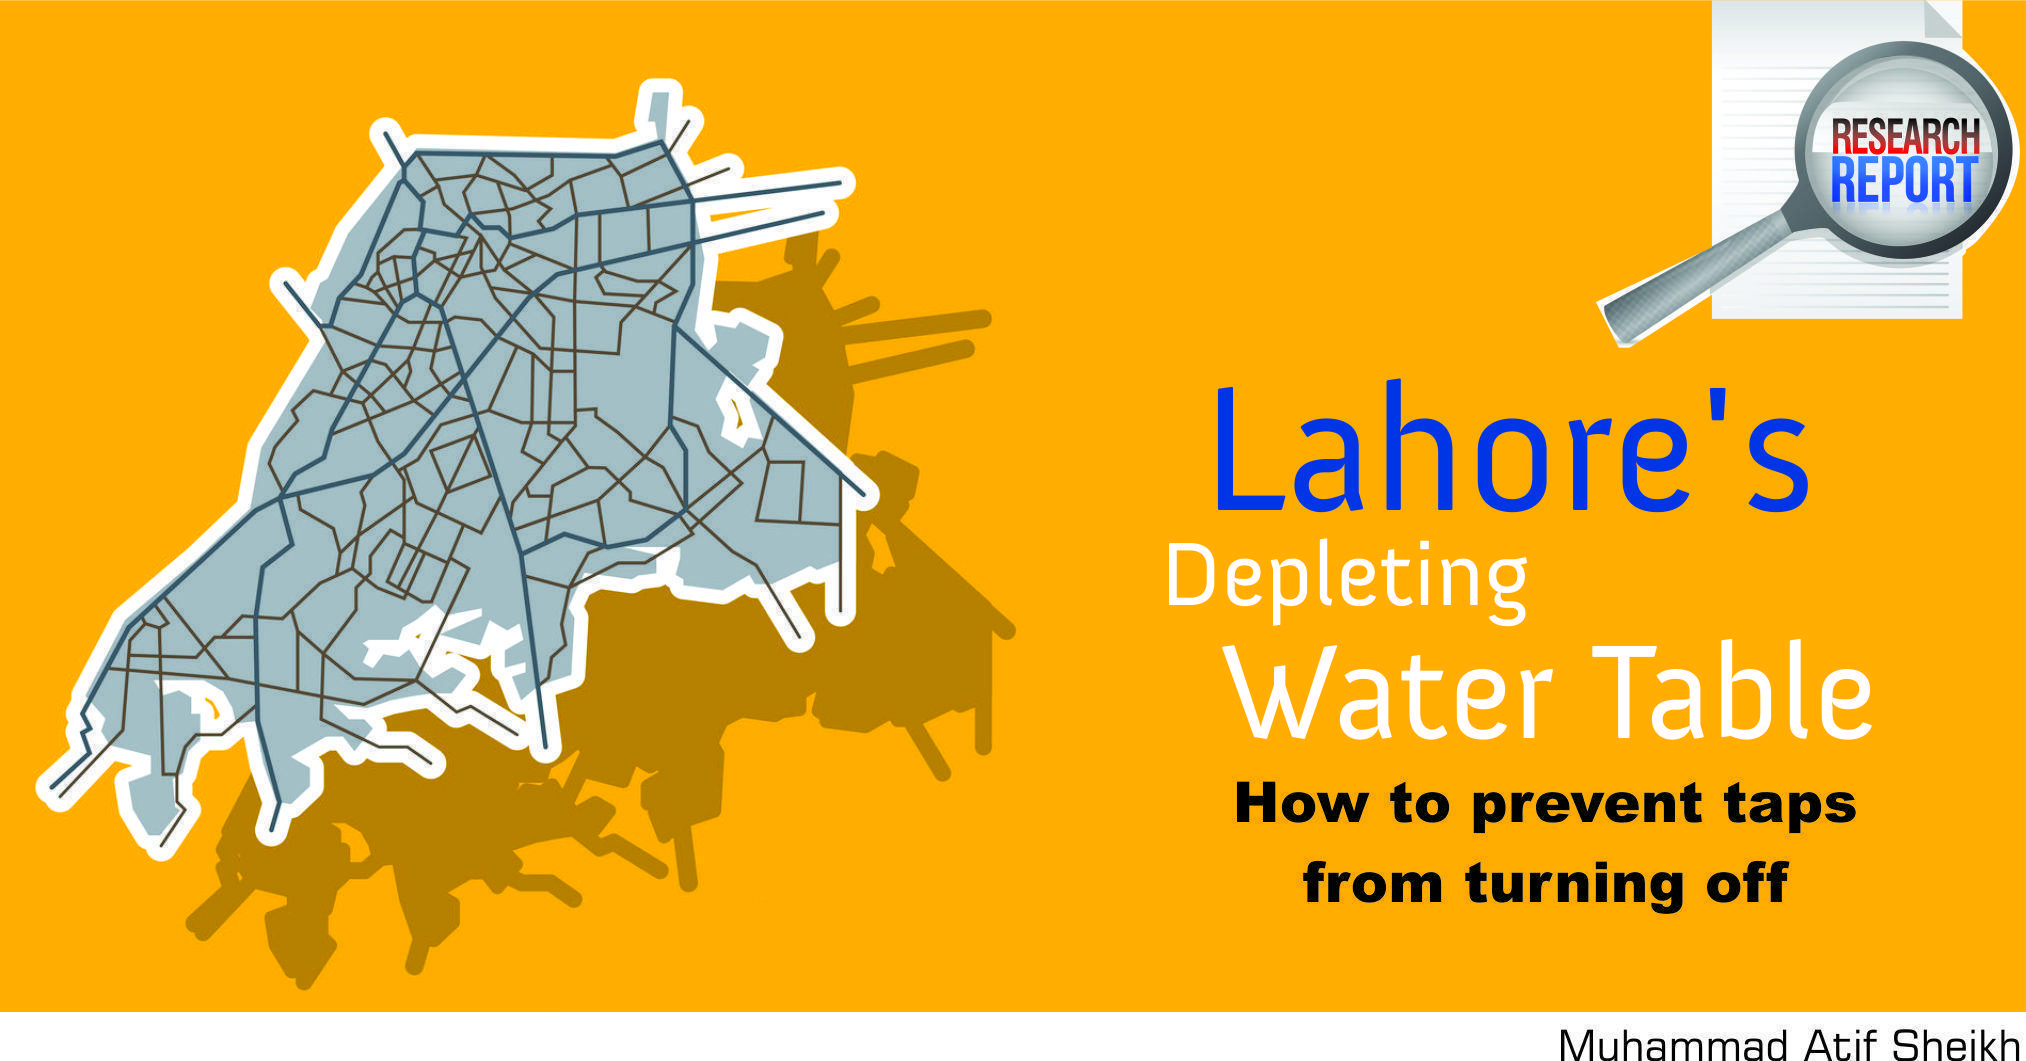 You are currently viewing Lahore’s Depleting Water Table How to prevent taps from turning off